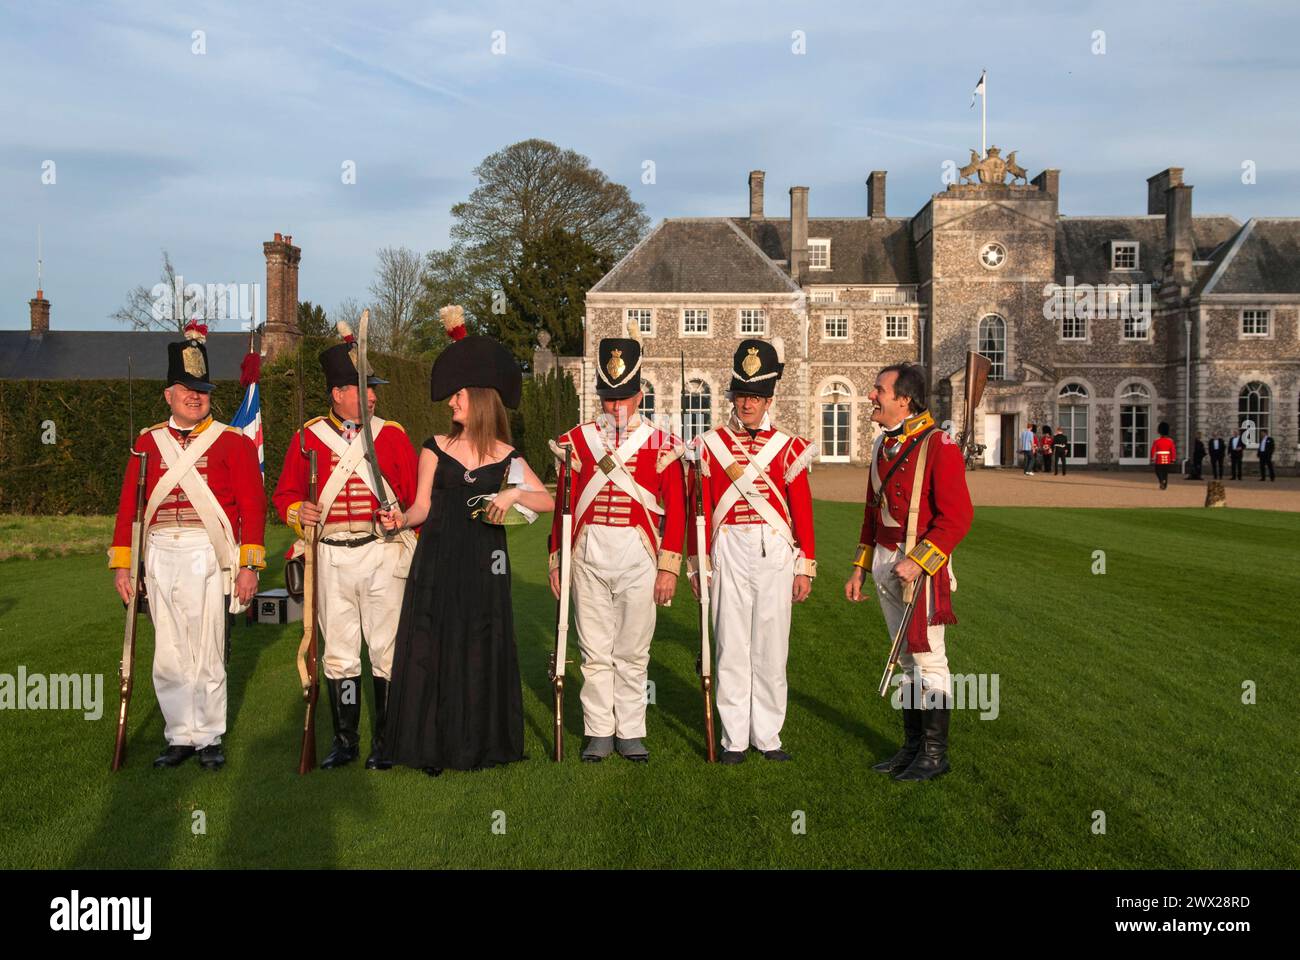 Country mansion British society wealth landed gentry private home Farleigh Wallop House, Farleigh Wallop, Hampshire. Lady Clementine Wallop with re-enactment weekend soldiers. UK 2008 2000s HOMER SYKES Stock Photo